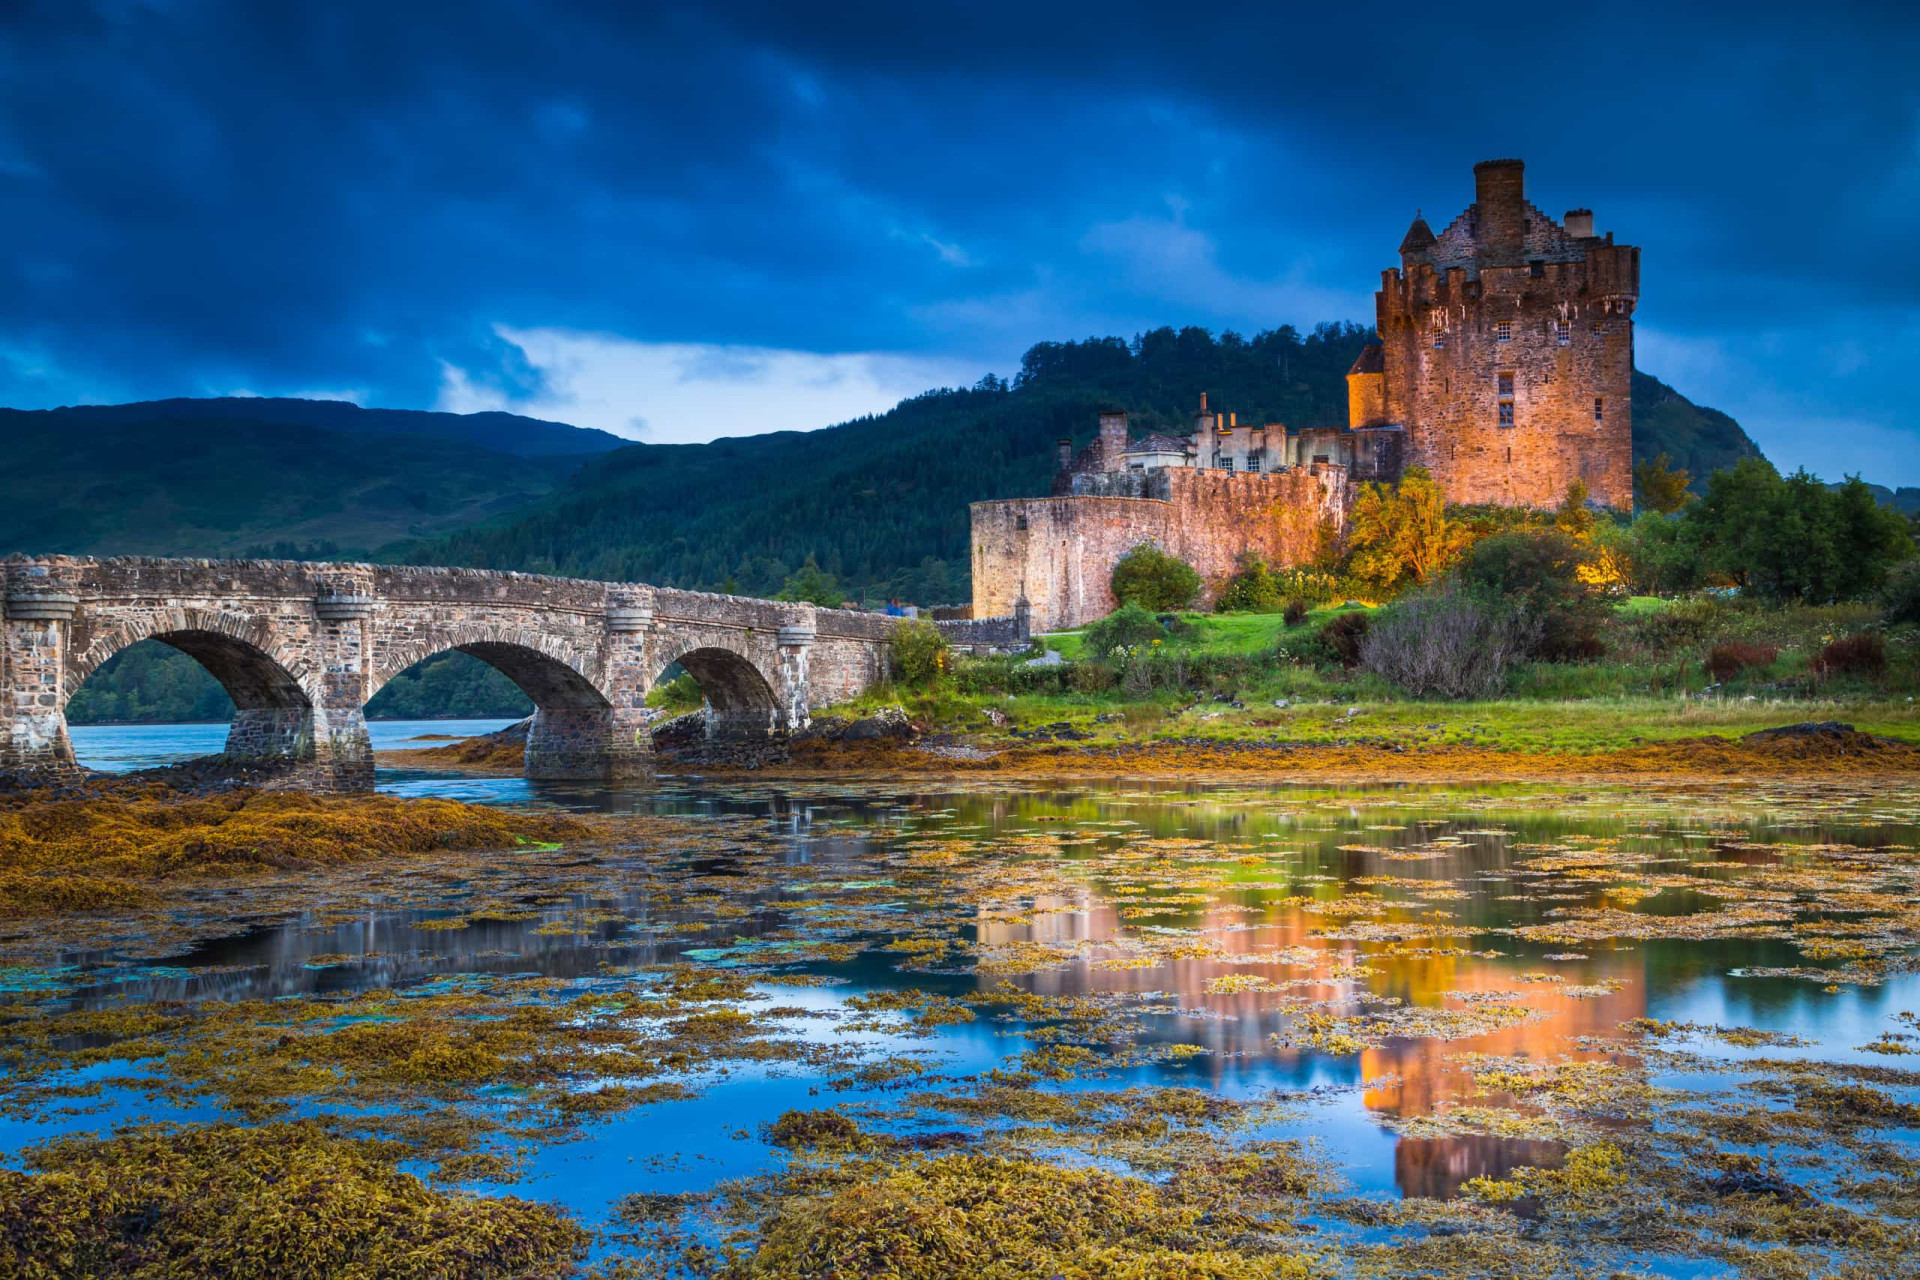 <p>It may be one of Scotland's most beautiful castles, but the 13th-century Eilean Donal Castle, in the rugged western Highlands, is also one of the spookiest spots in the country. Built by the Clan Mackenzie and Clan Macrae to defend the area from marauding Vikings, it has a bloodied history.</p><p><a href="https://www.msn.com/en-ca/community/channel/vid-7xx8mnucu55yw63we9va2gwr7uihbxwc68fxqp25x6tg4ftibpra?cvid=94631541bc0f4f89bfd59158d696ad7e">Follow us and access great exclusive content every day</a></p>